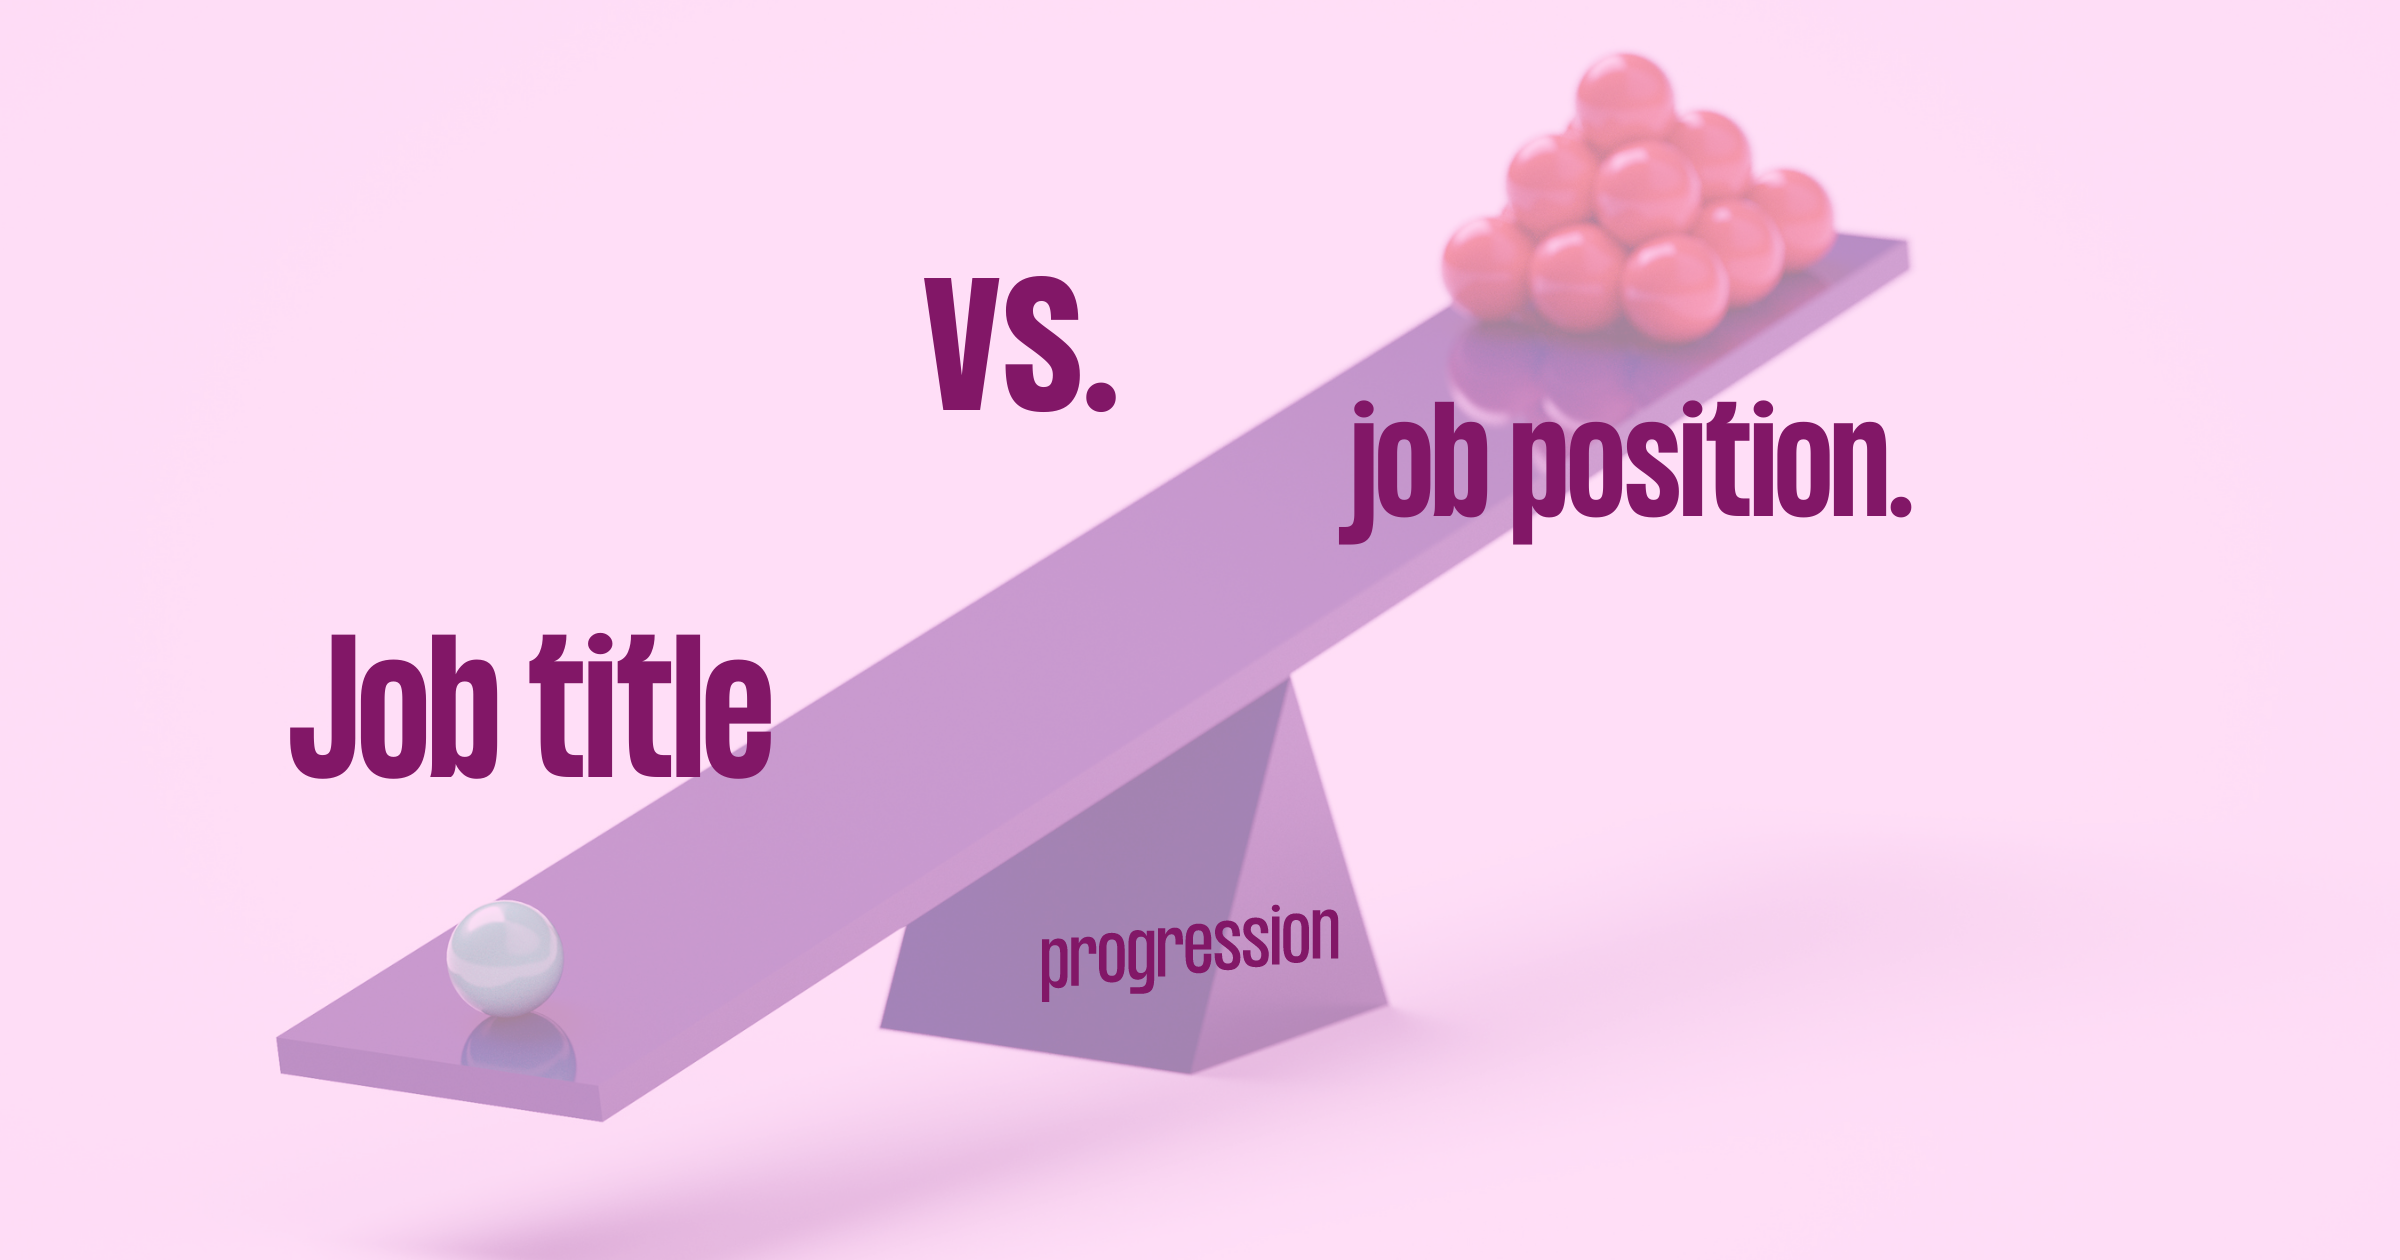 Job title vs. job position: what is the difference?